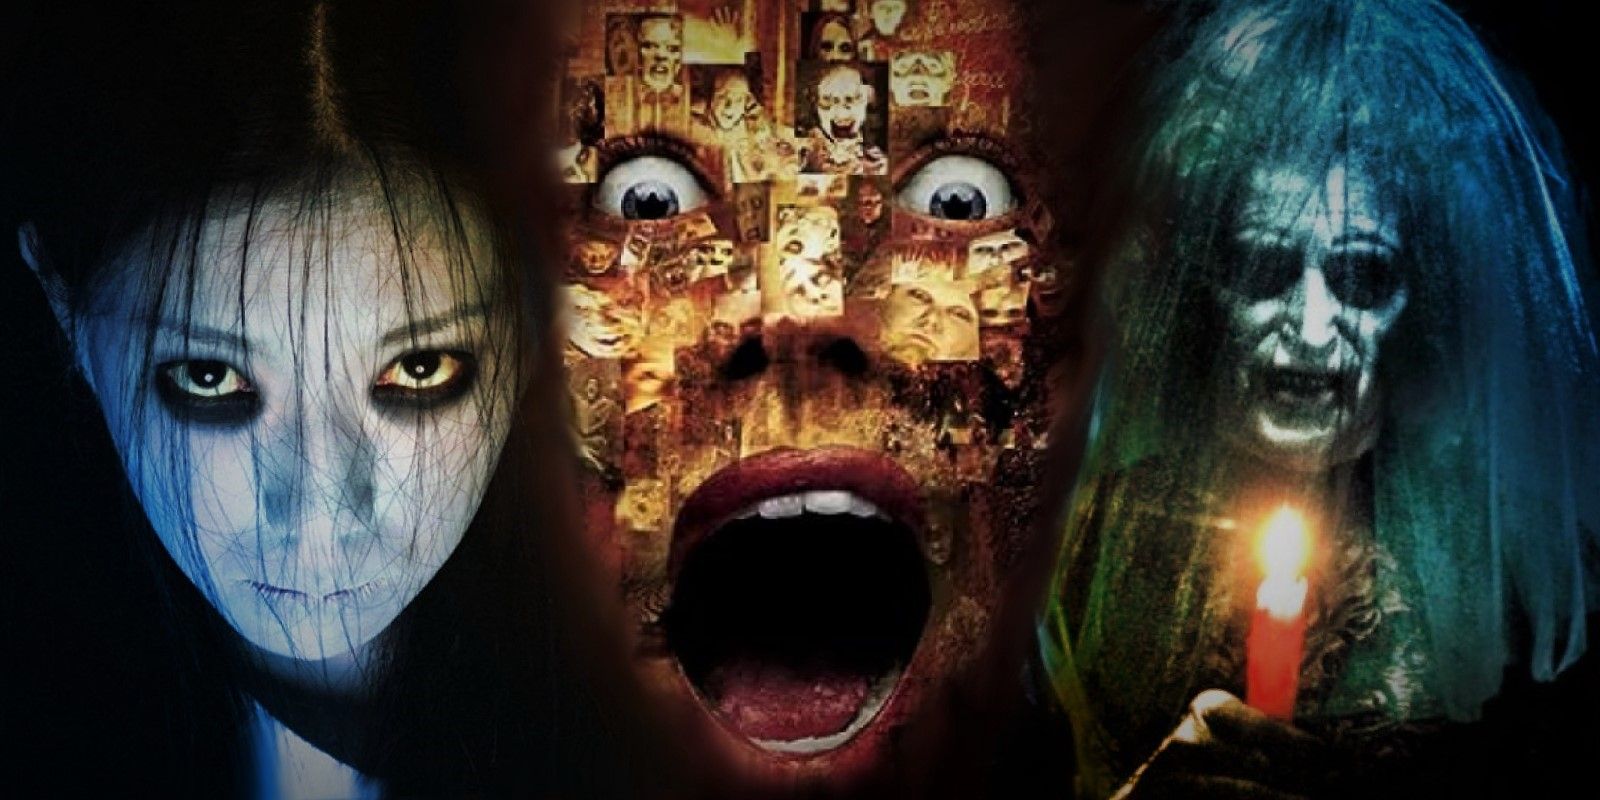 Thirteen Ghosts collage poster in between The Grudge and The Bride and Black from Insidious. 